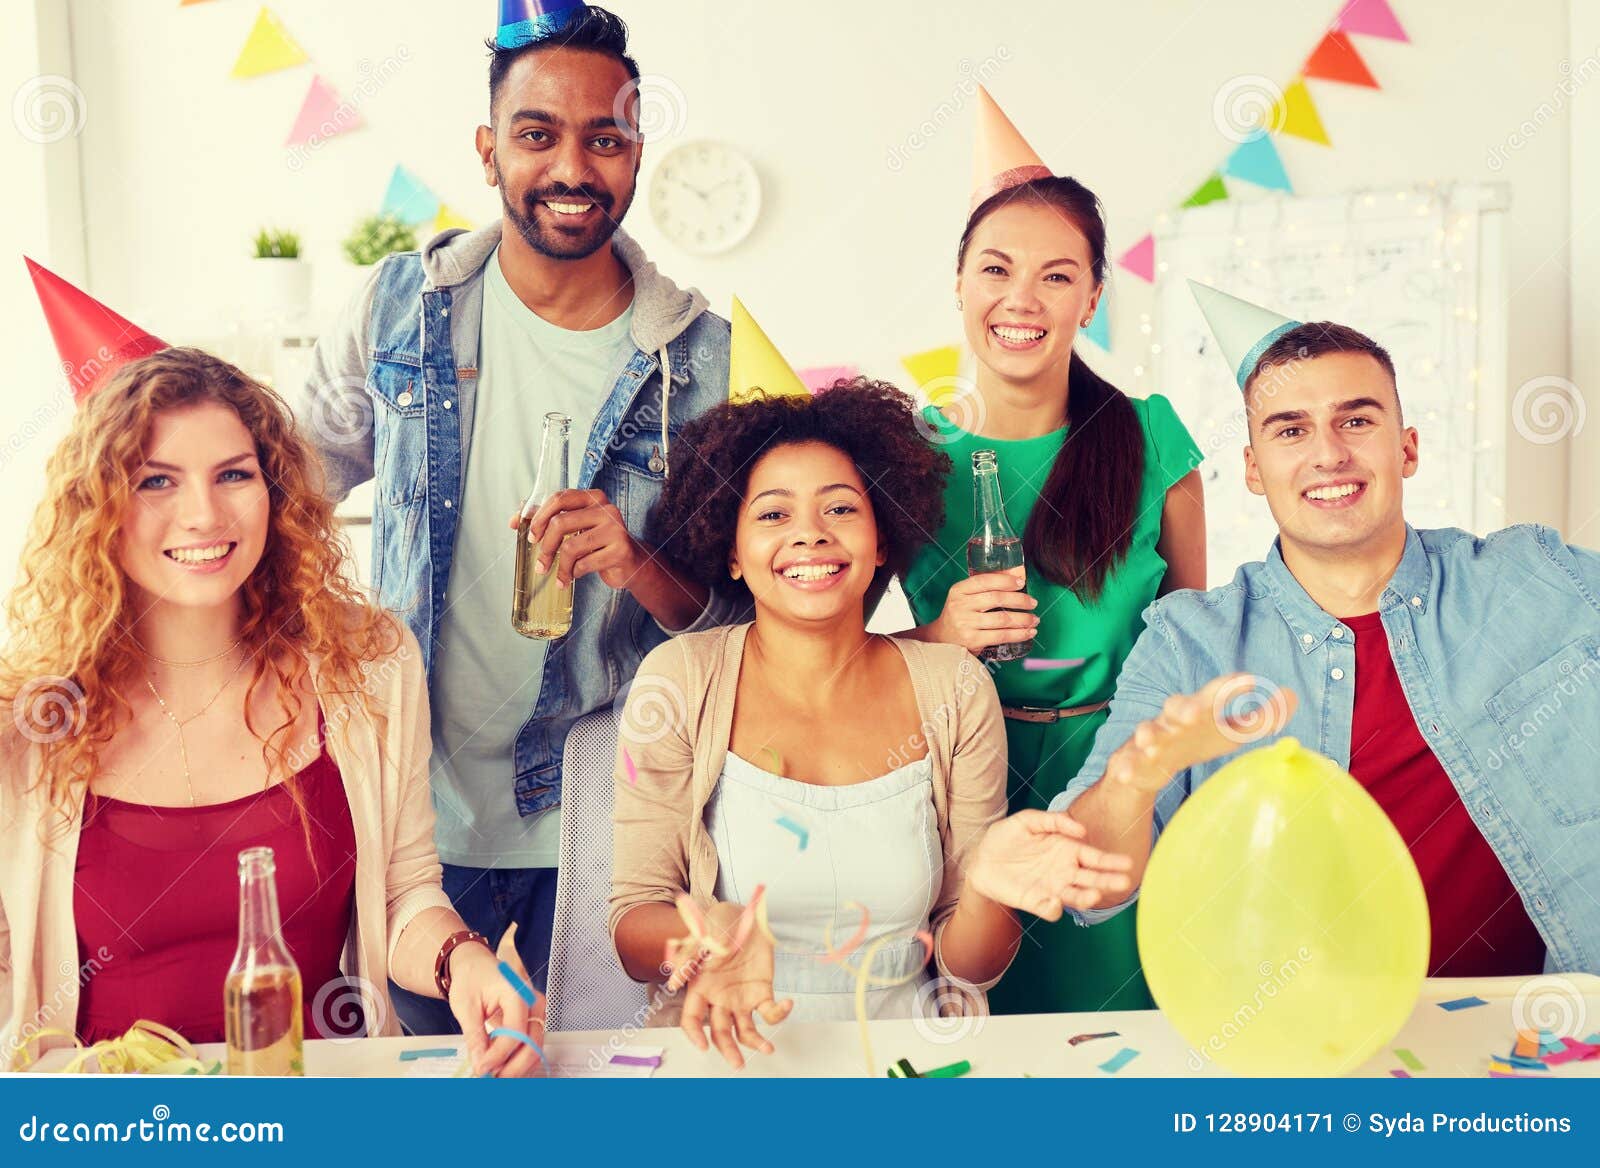 Happy Team Having Fun At Office Party Stock Image - Image of african ... Office Team Celebration